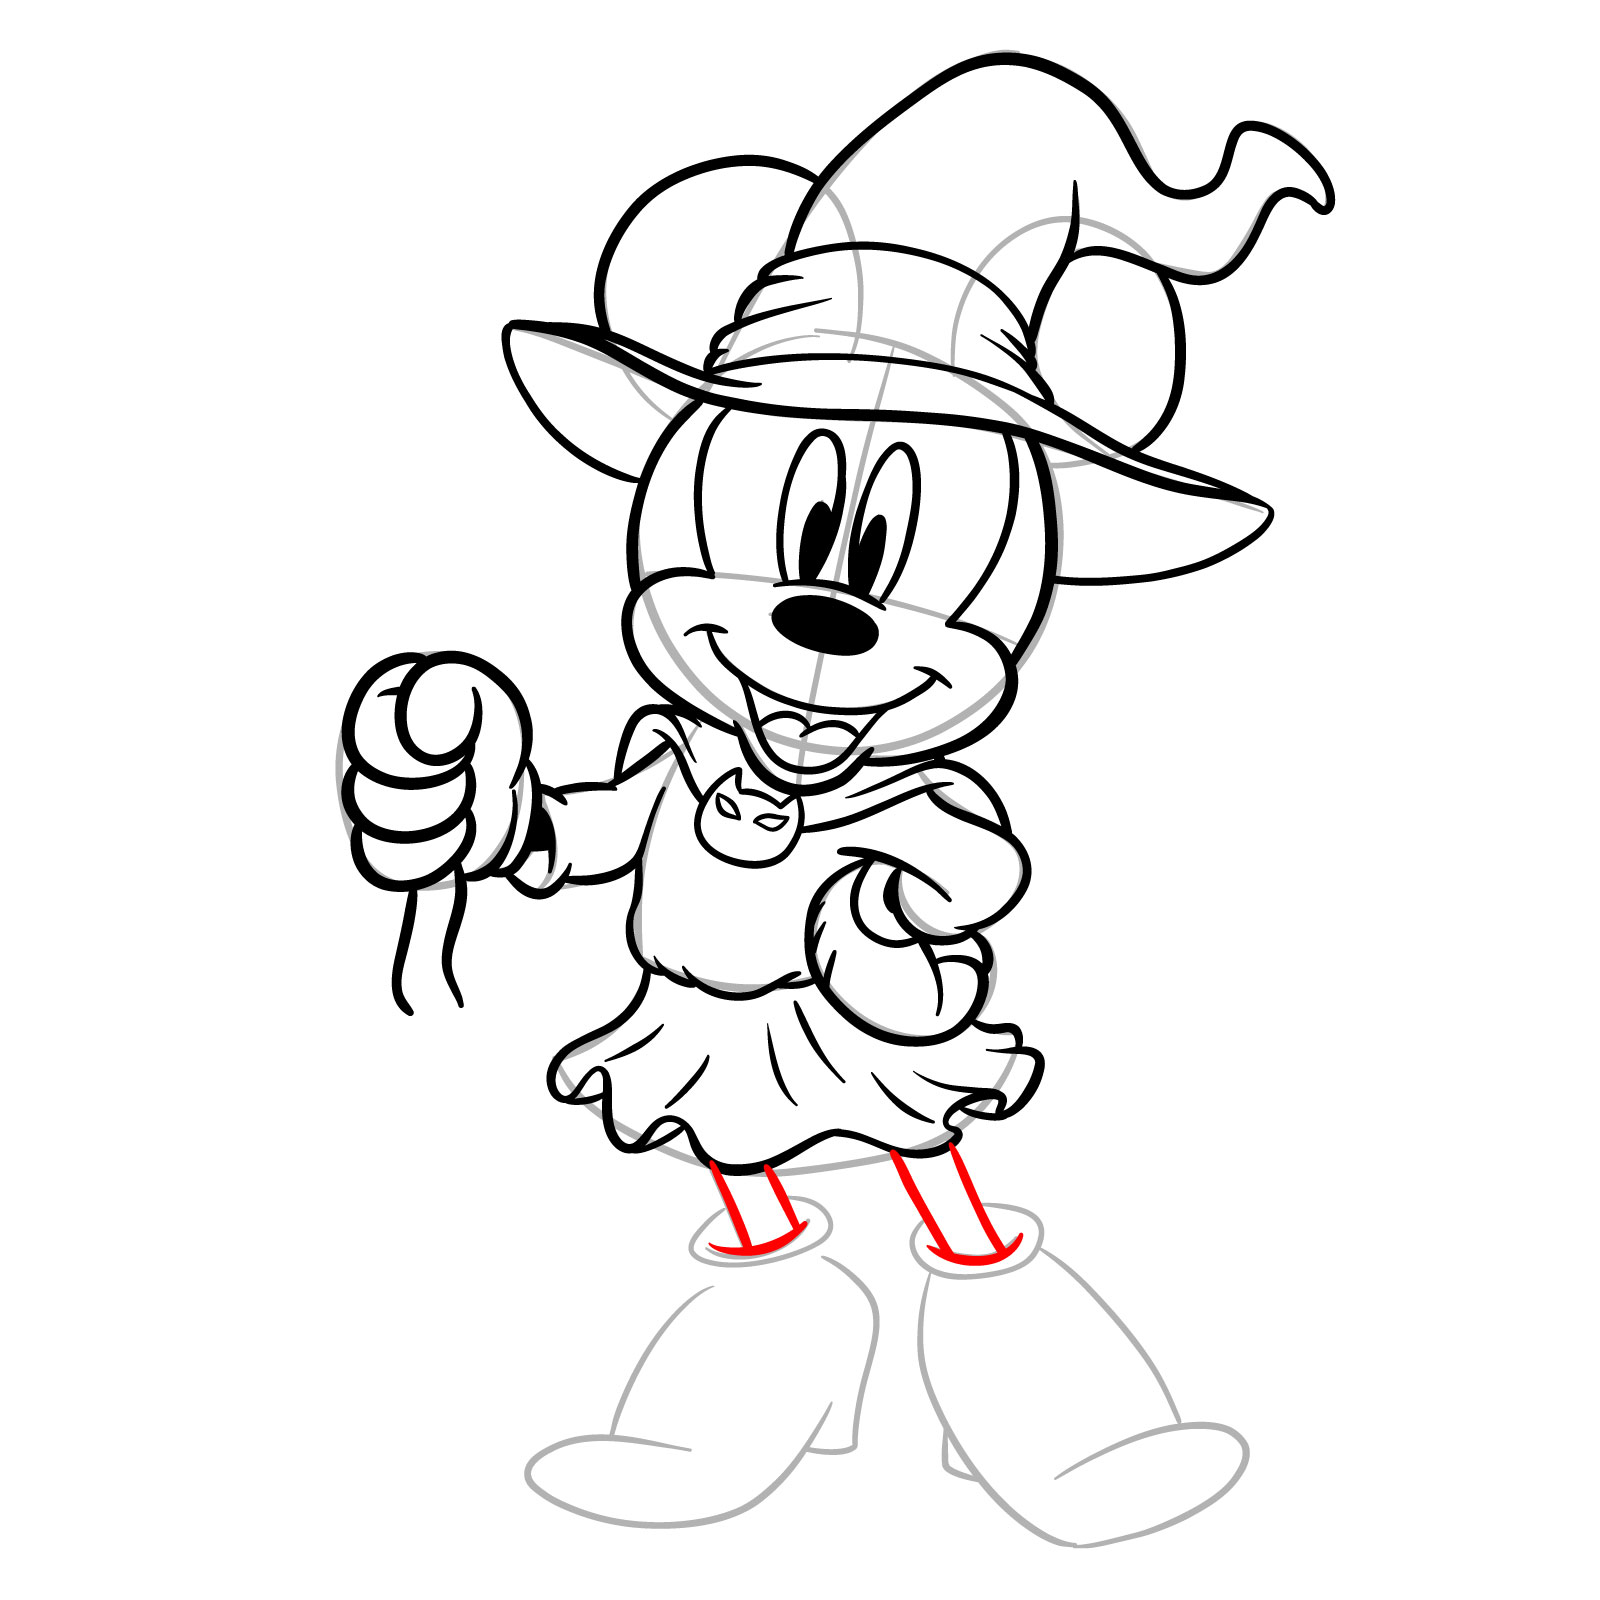 How to draw Halloween Minnie Mouse as a witch - step 25